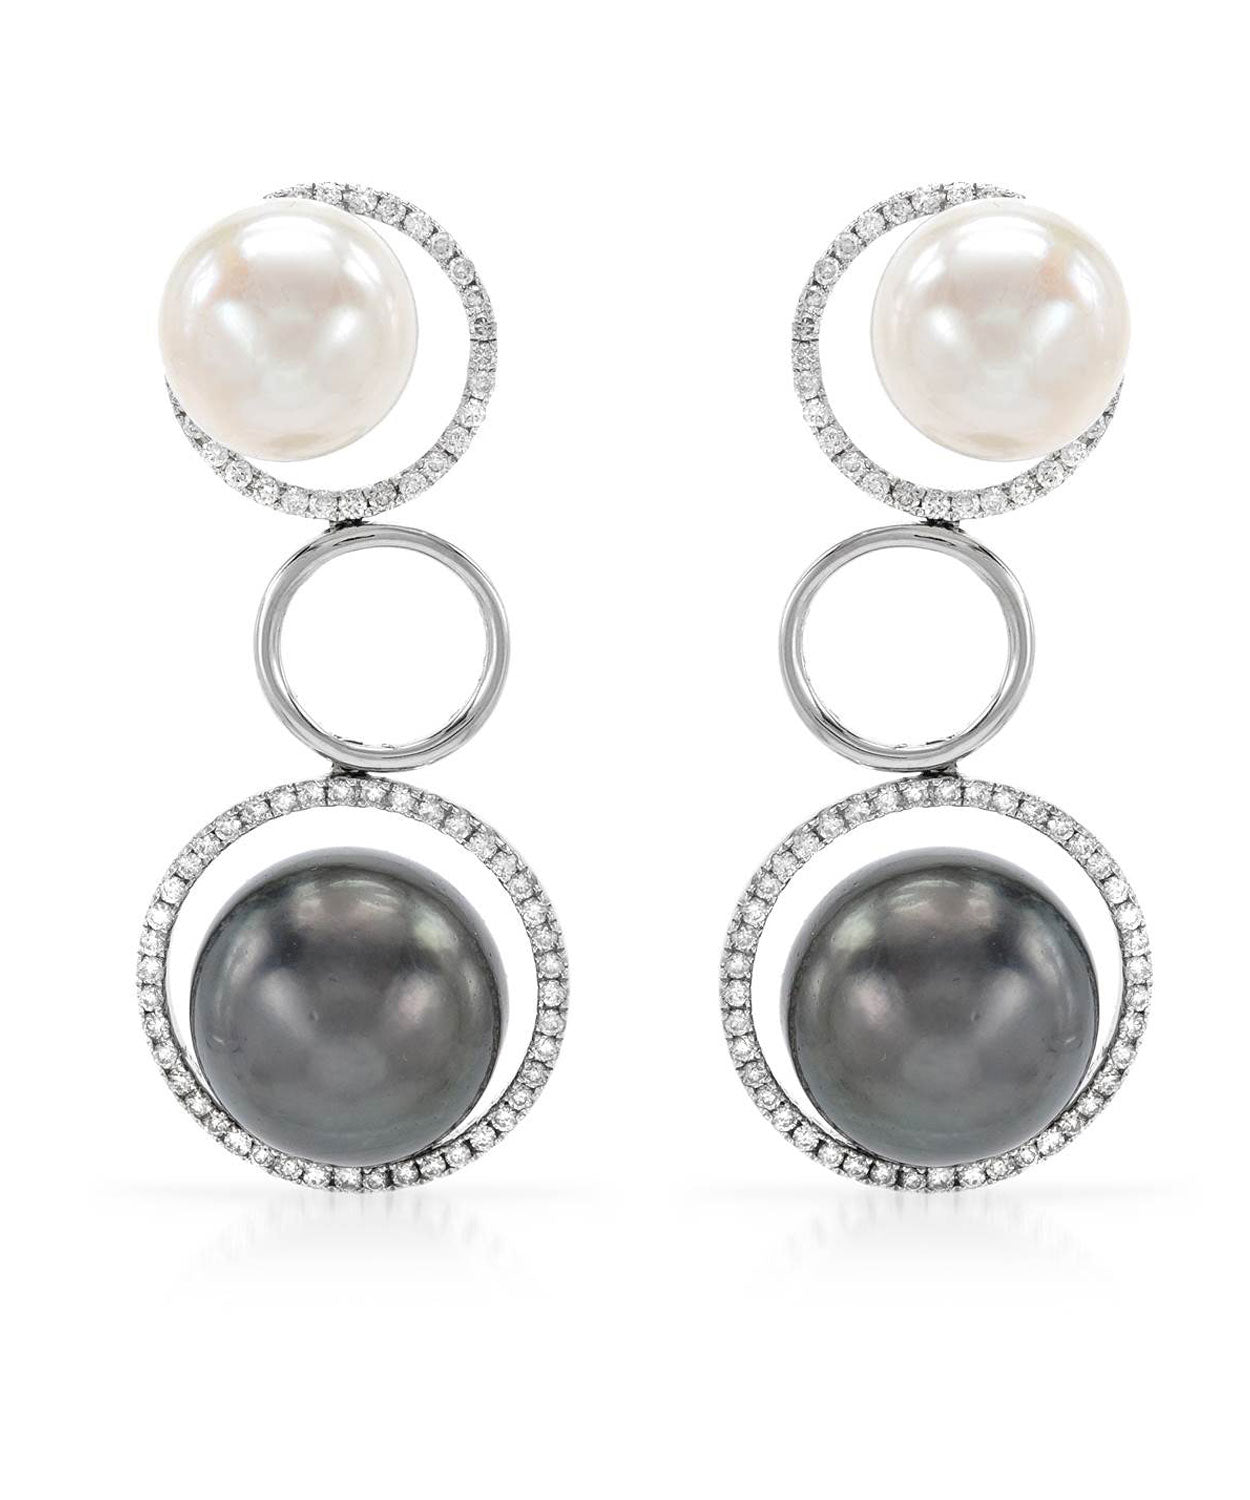 Black & White Collection 0.80 ctw Natural Freshwater Pearl and Diamond 18k White Gold Earrings View 1